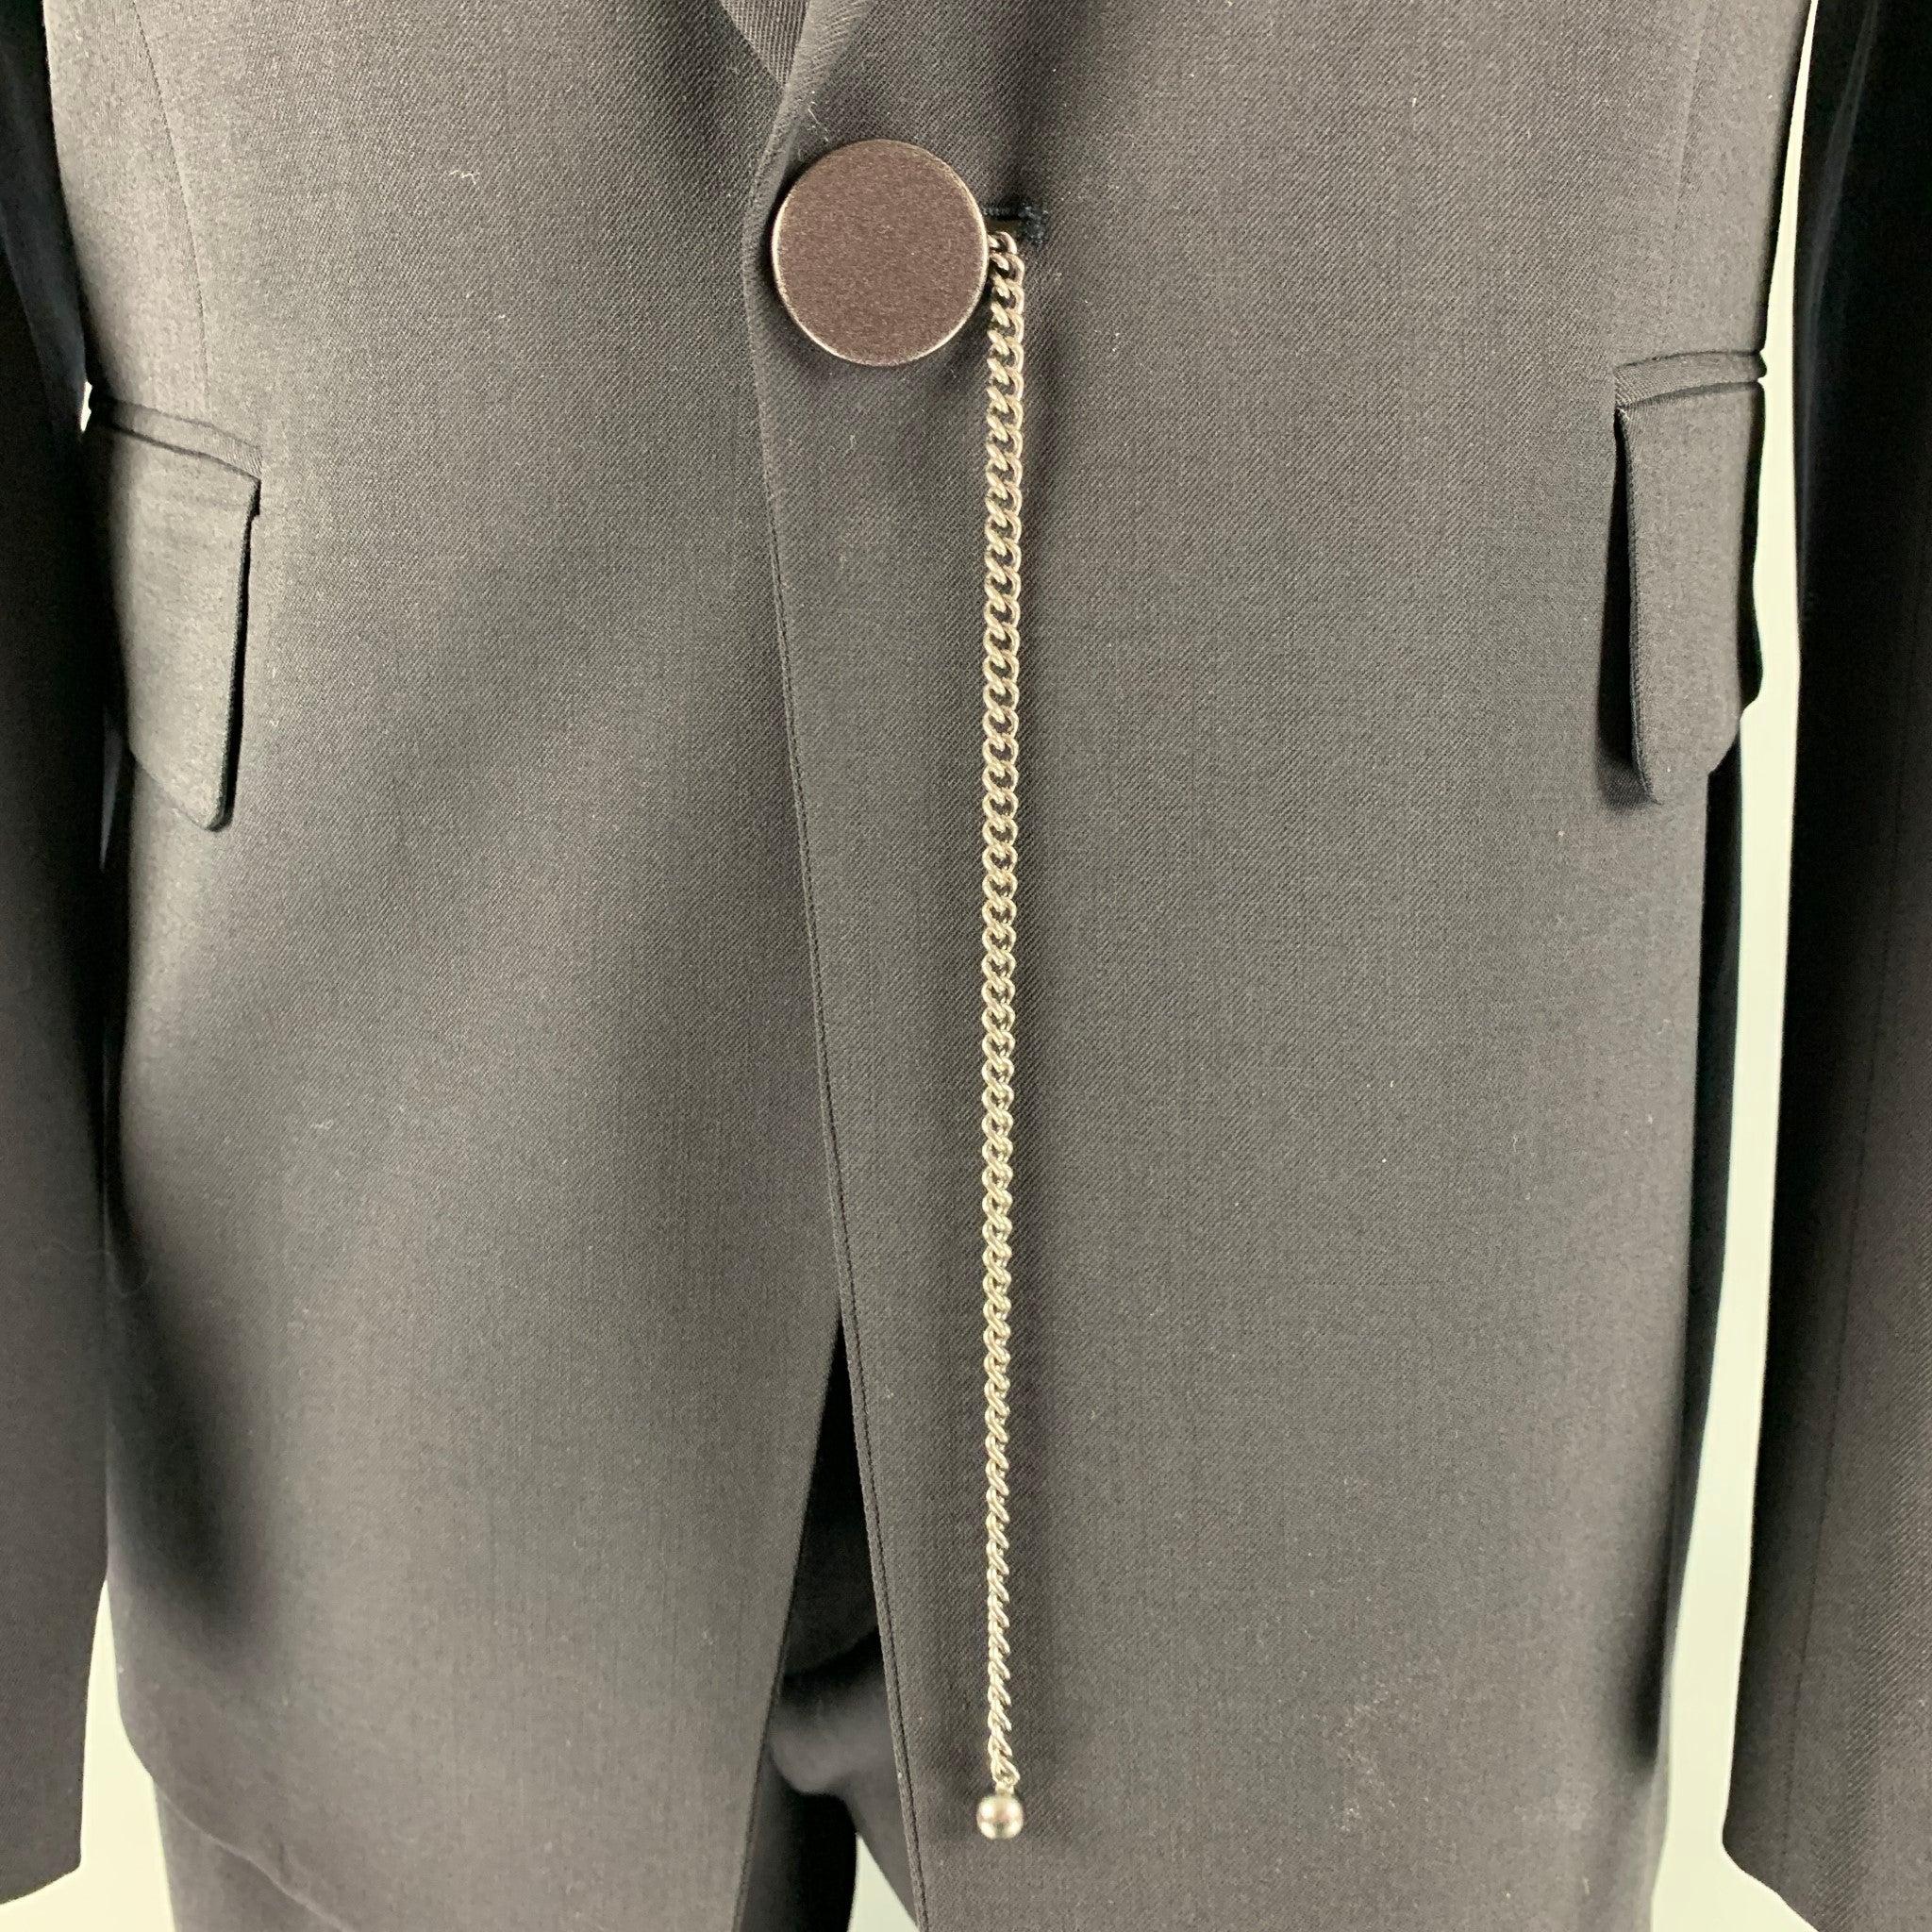 DIRK BIKKEMBERGS suit comes in a black wool woven material with a full liner and includes a single breasted sport coat with notch lapel and matching flat front trousers. Made in Italy.Very Good Pre-Owned Condition. 

Marked:   50 

Measurements: 
 